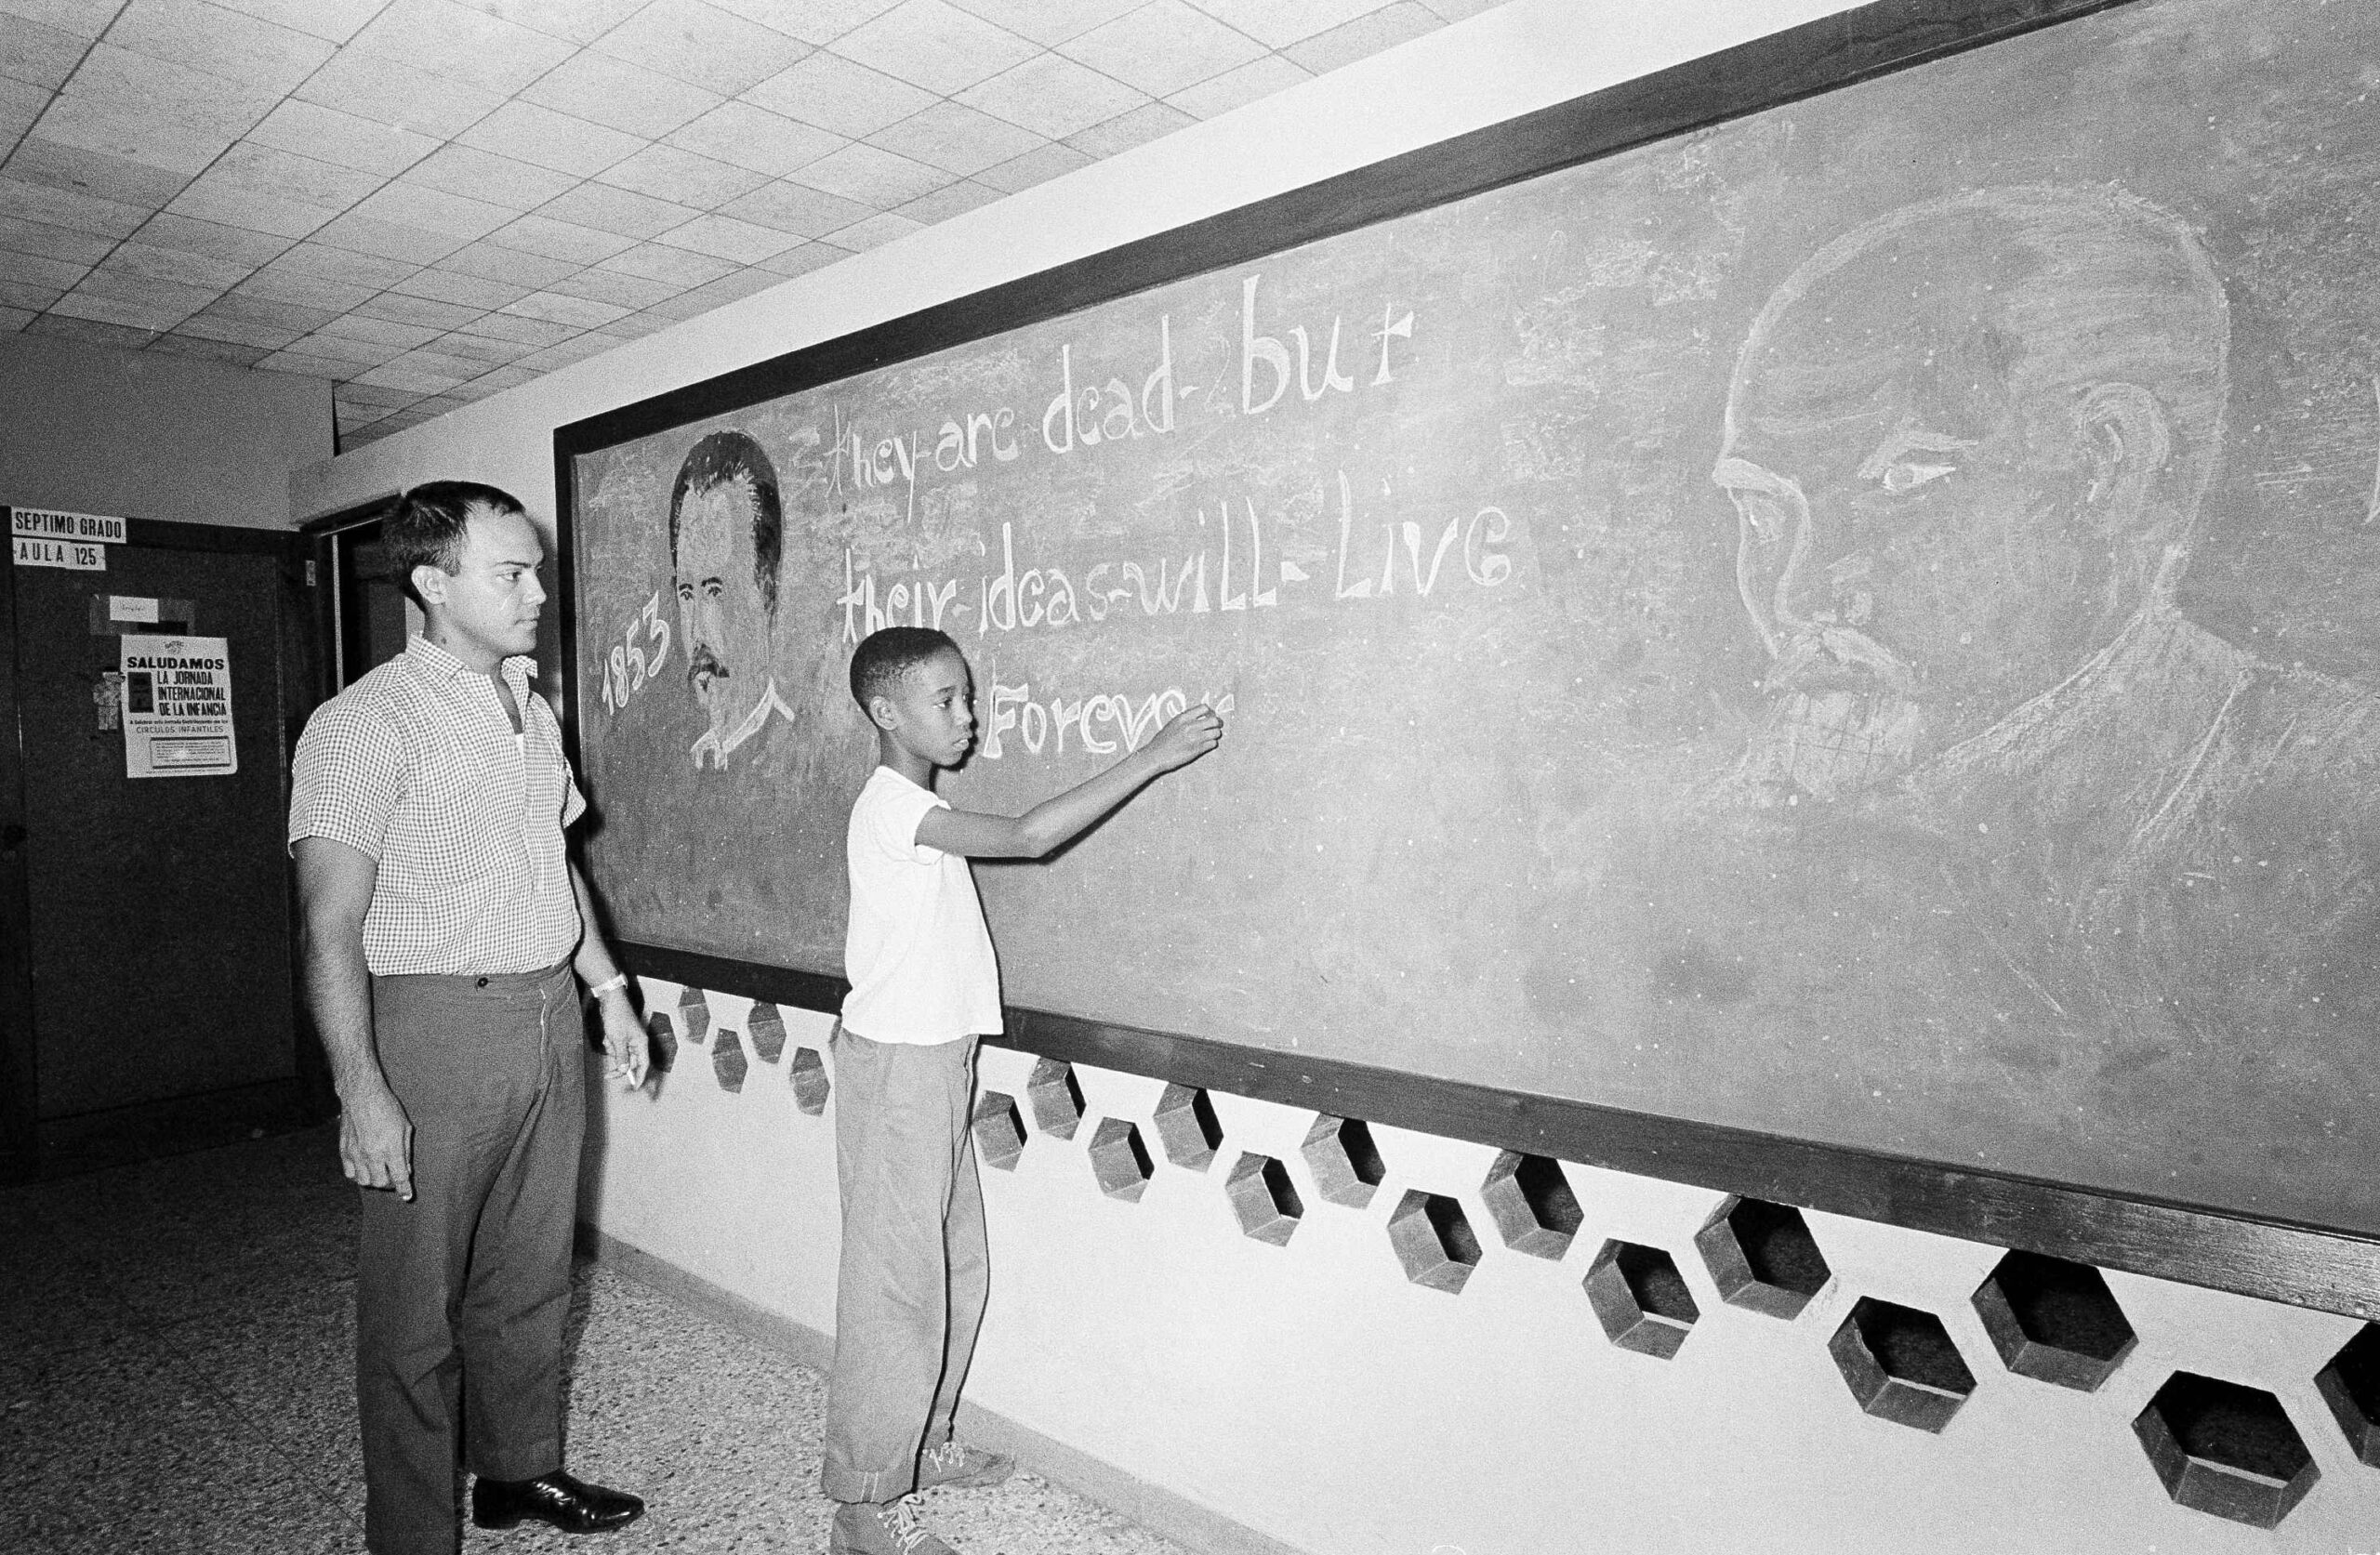 A student and teacher work on a chalkboard